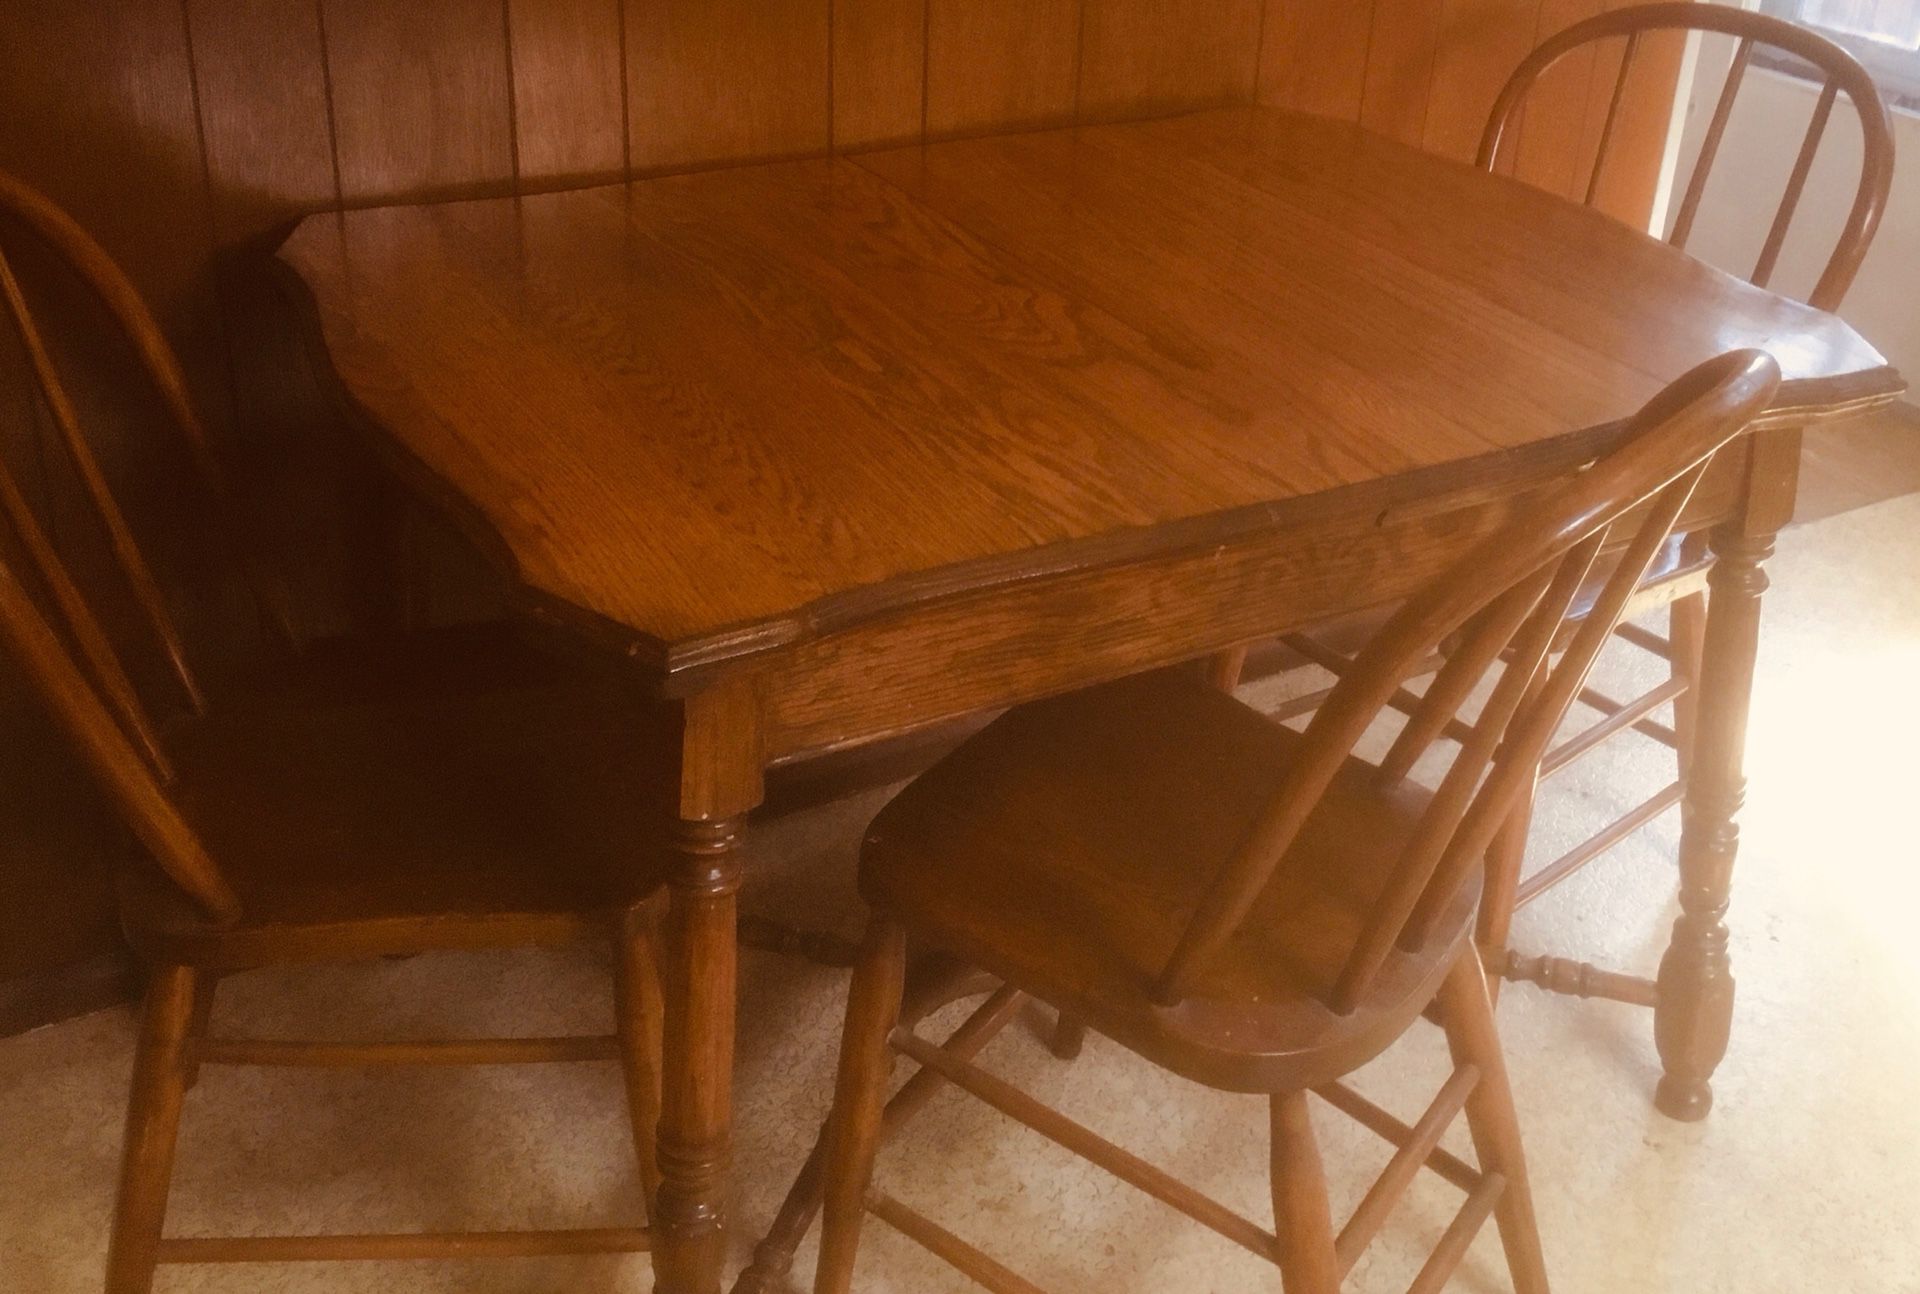 Oak Kitchen table With chairs